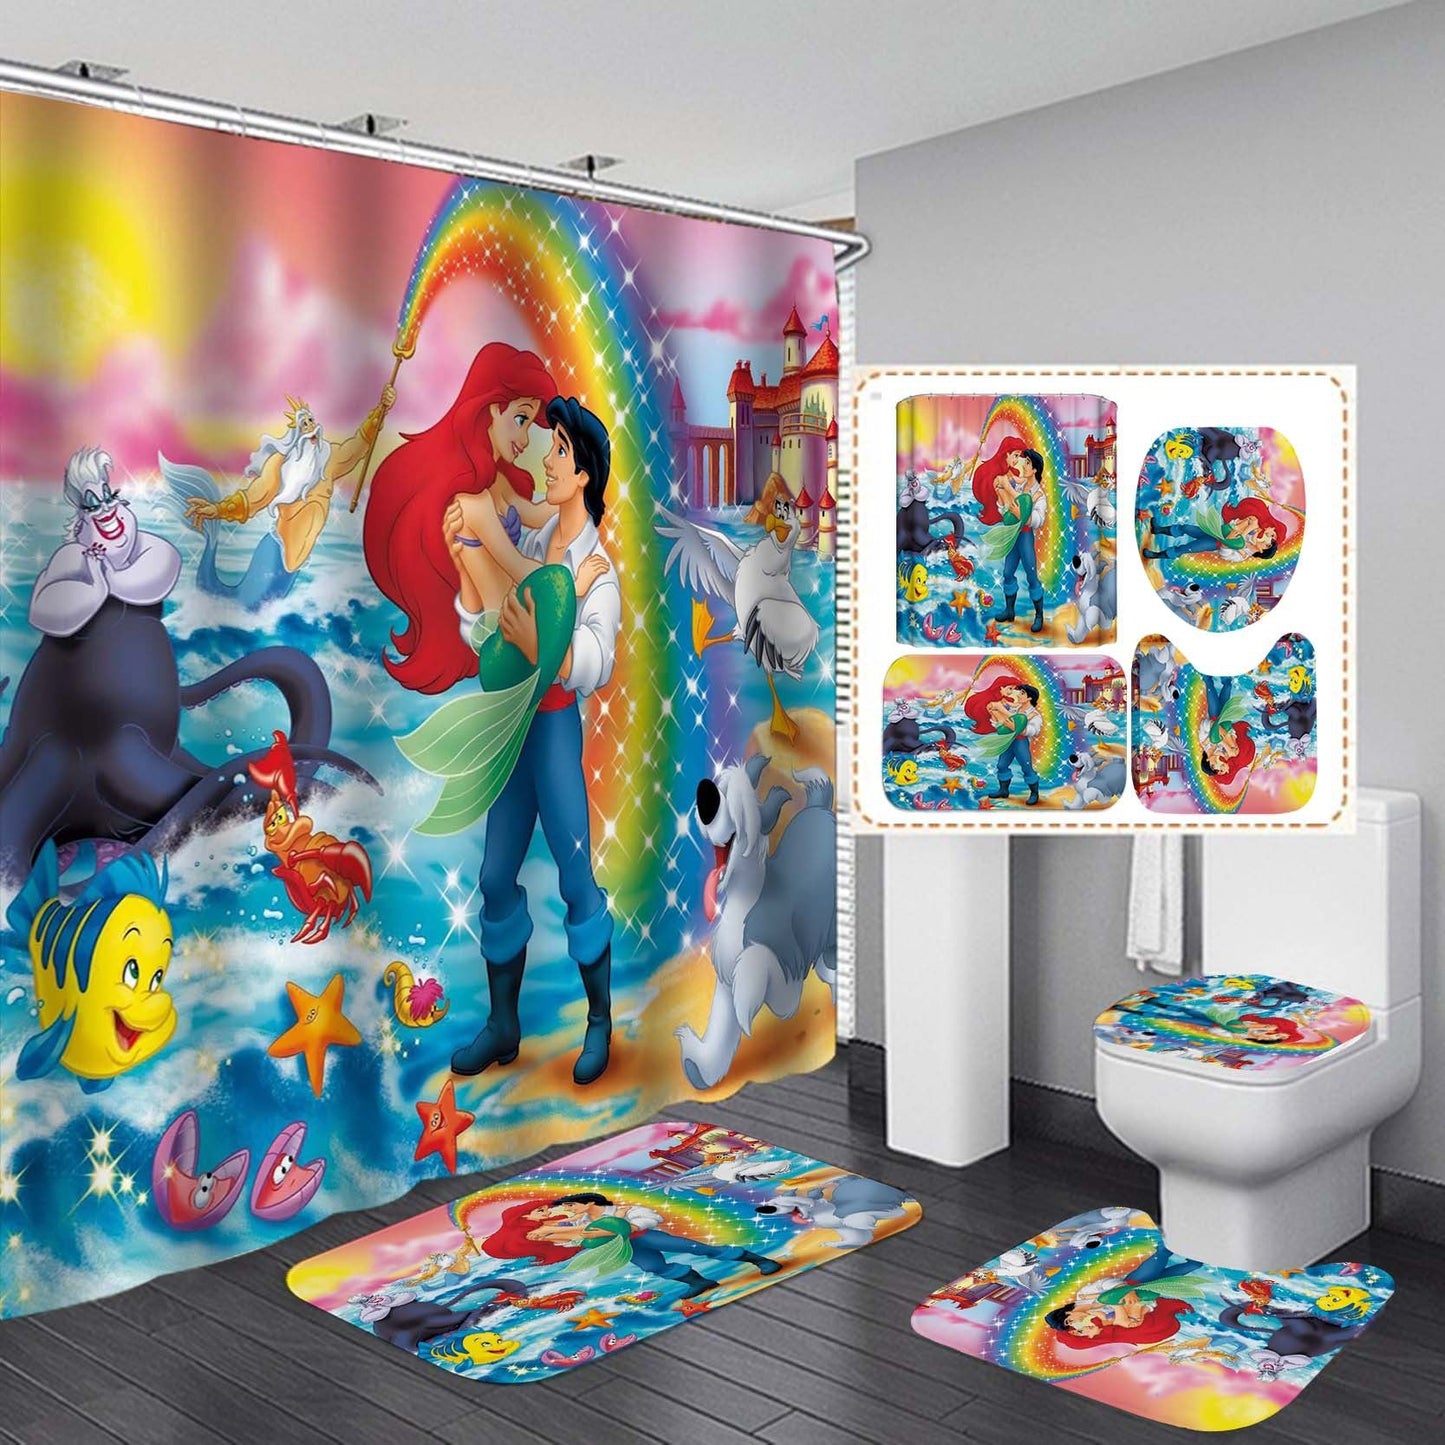 Cartoon Mermaid Design Shower Curtain Bathroom SetsNon-Slip Toilet Lid Cover-Shower Curtain-180×180cm Shower Curtain Only-3-Free Shipping at meselling99